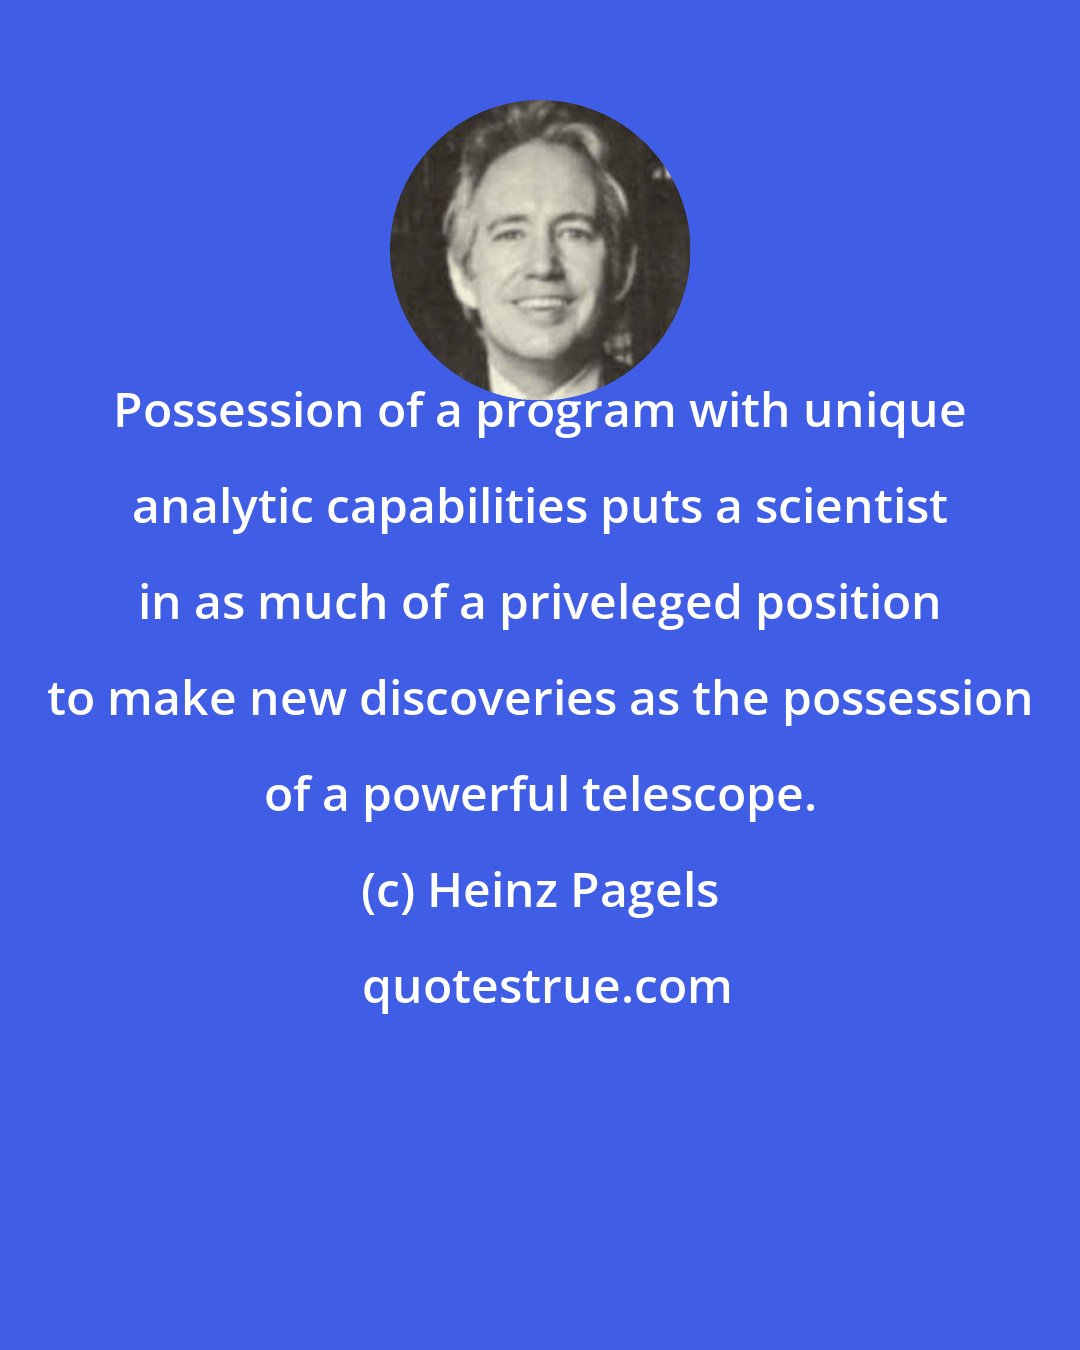 Heinz Pagels: Possession of a program with unique analytic capabilities puts a scientist in as much of a priveleged position to make new discoveries as the possession of a powerful telescope.